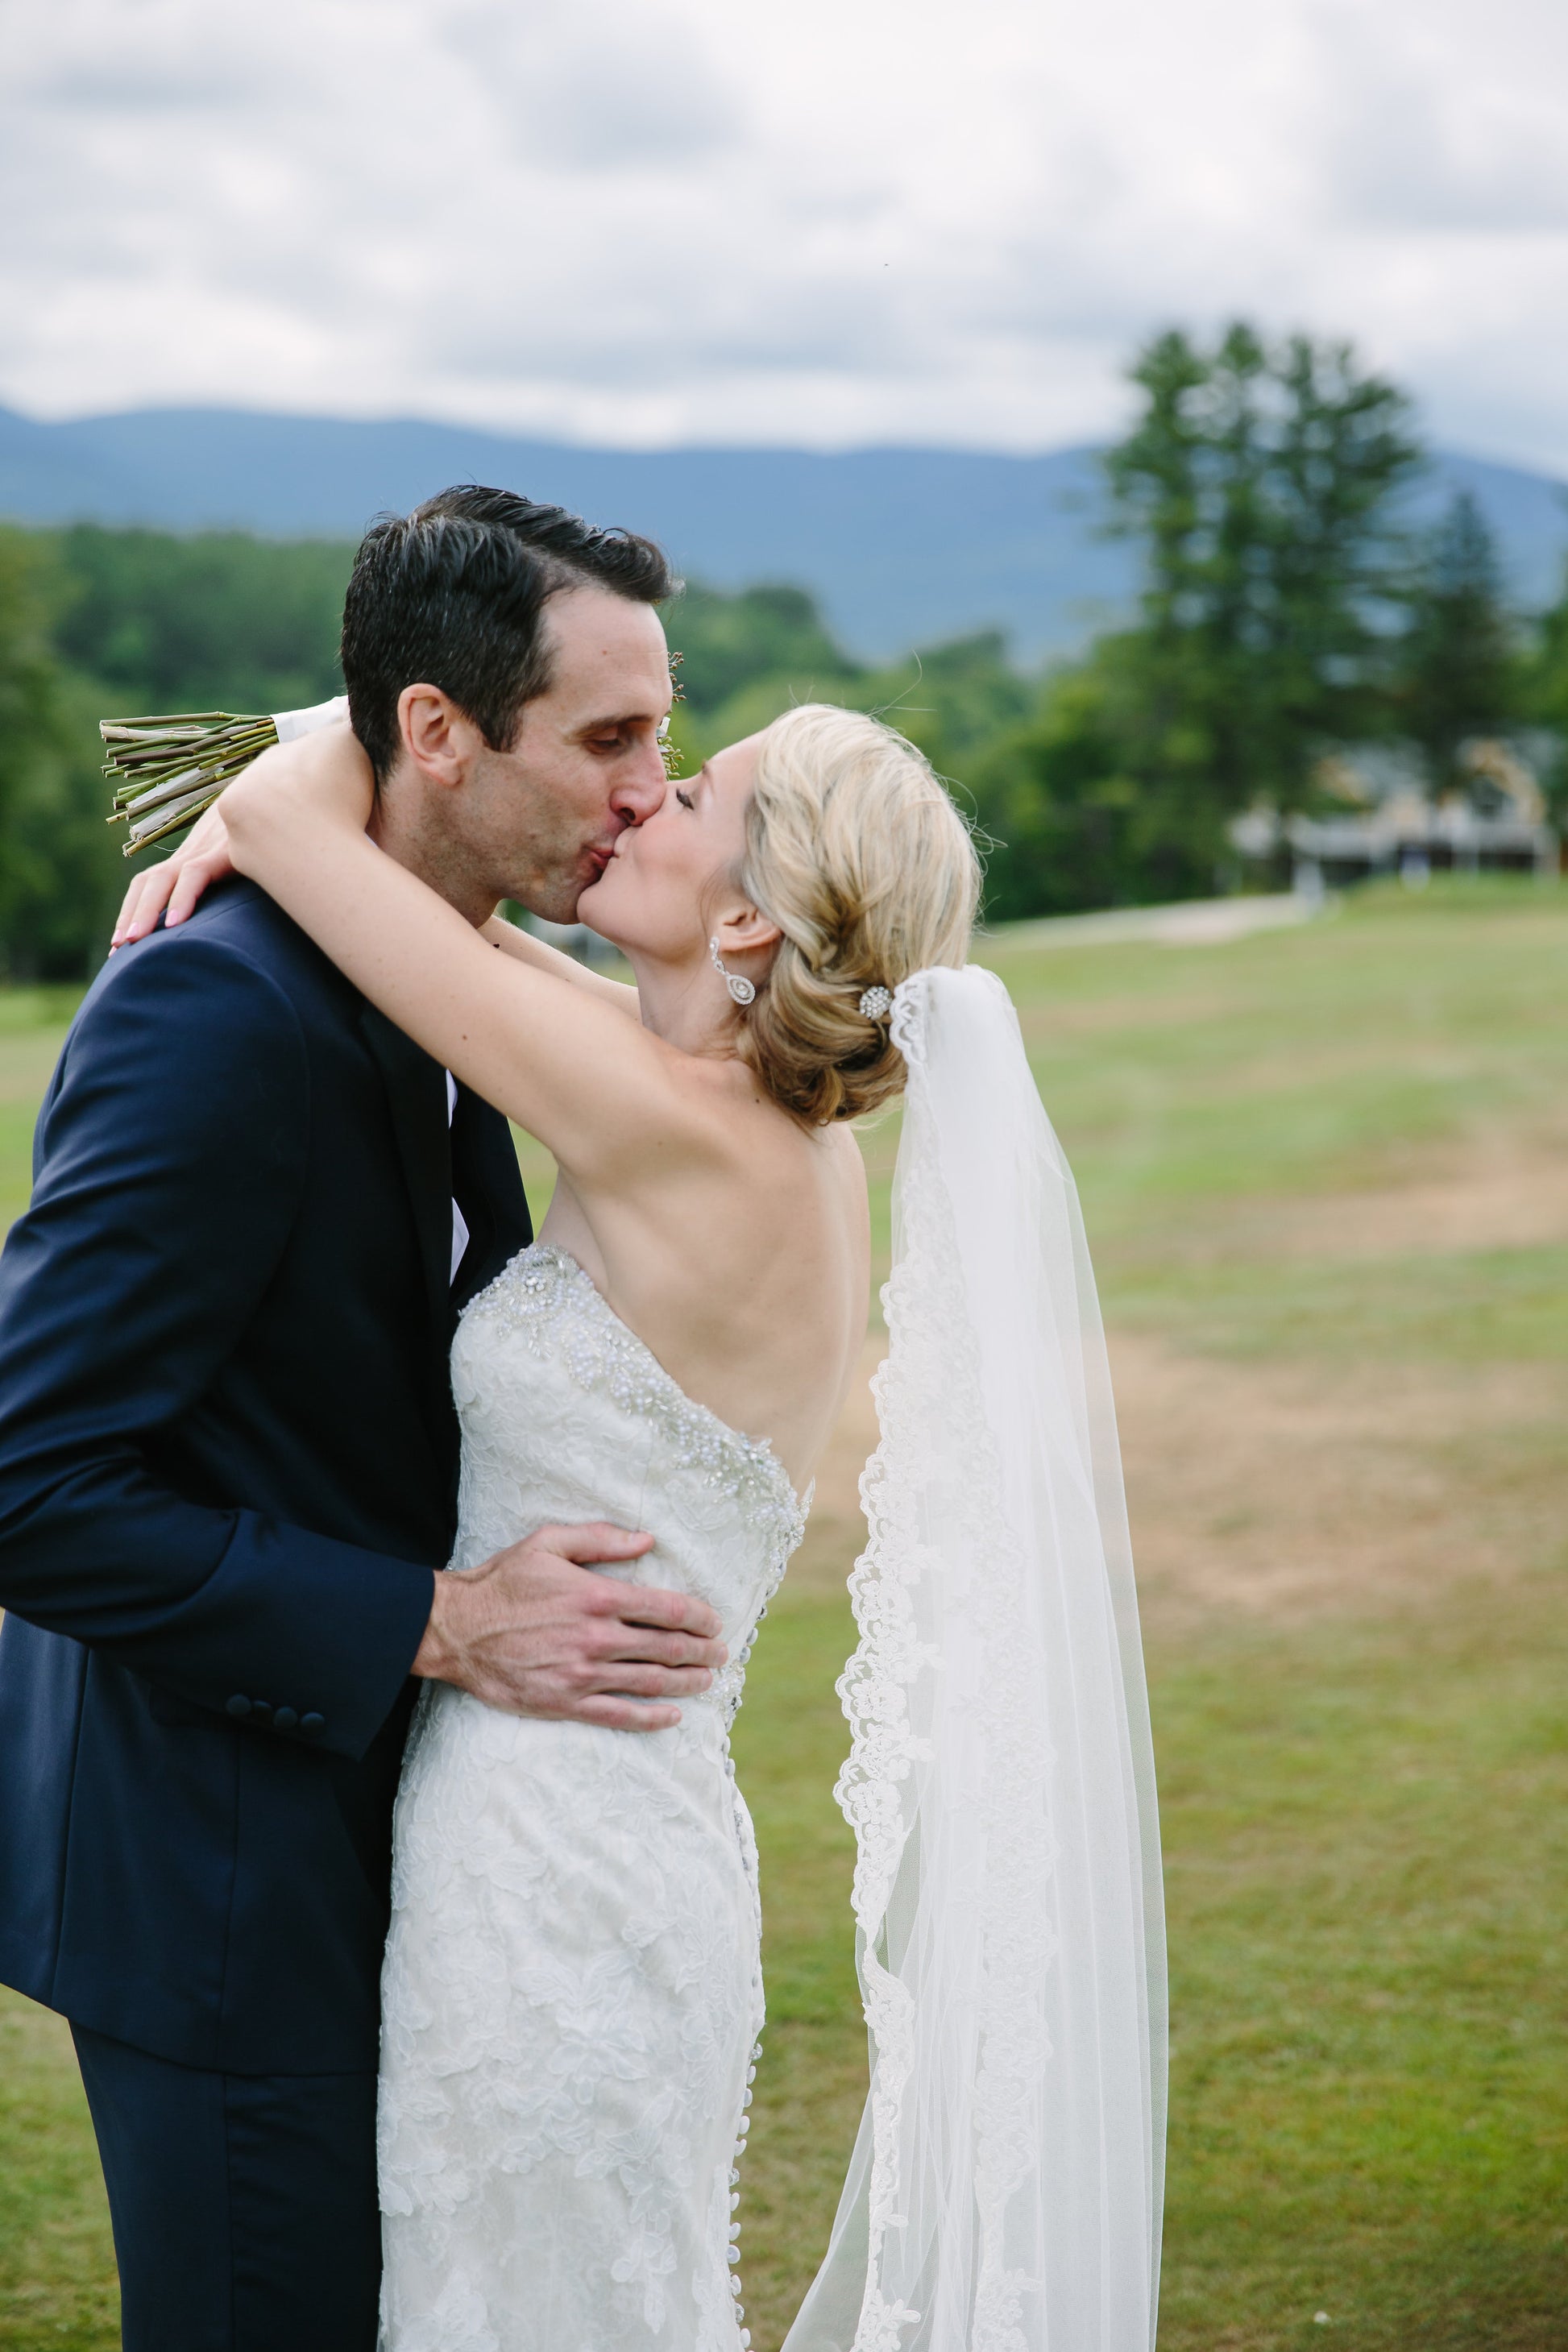 Outdoor Woodsy Romantic Wedding with Bride and Groom Kissing